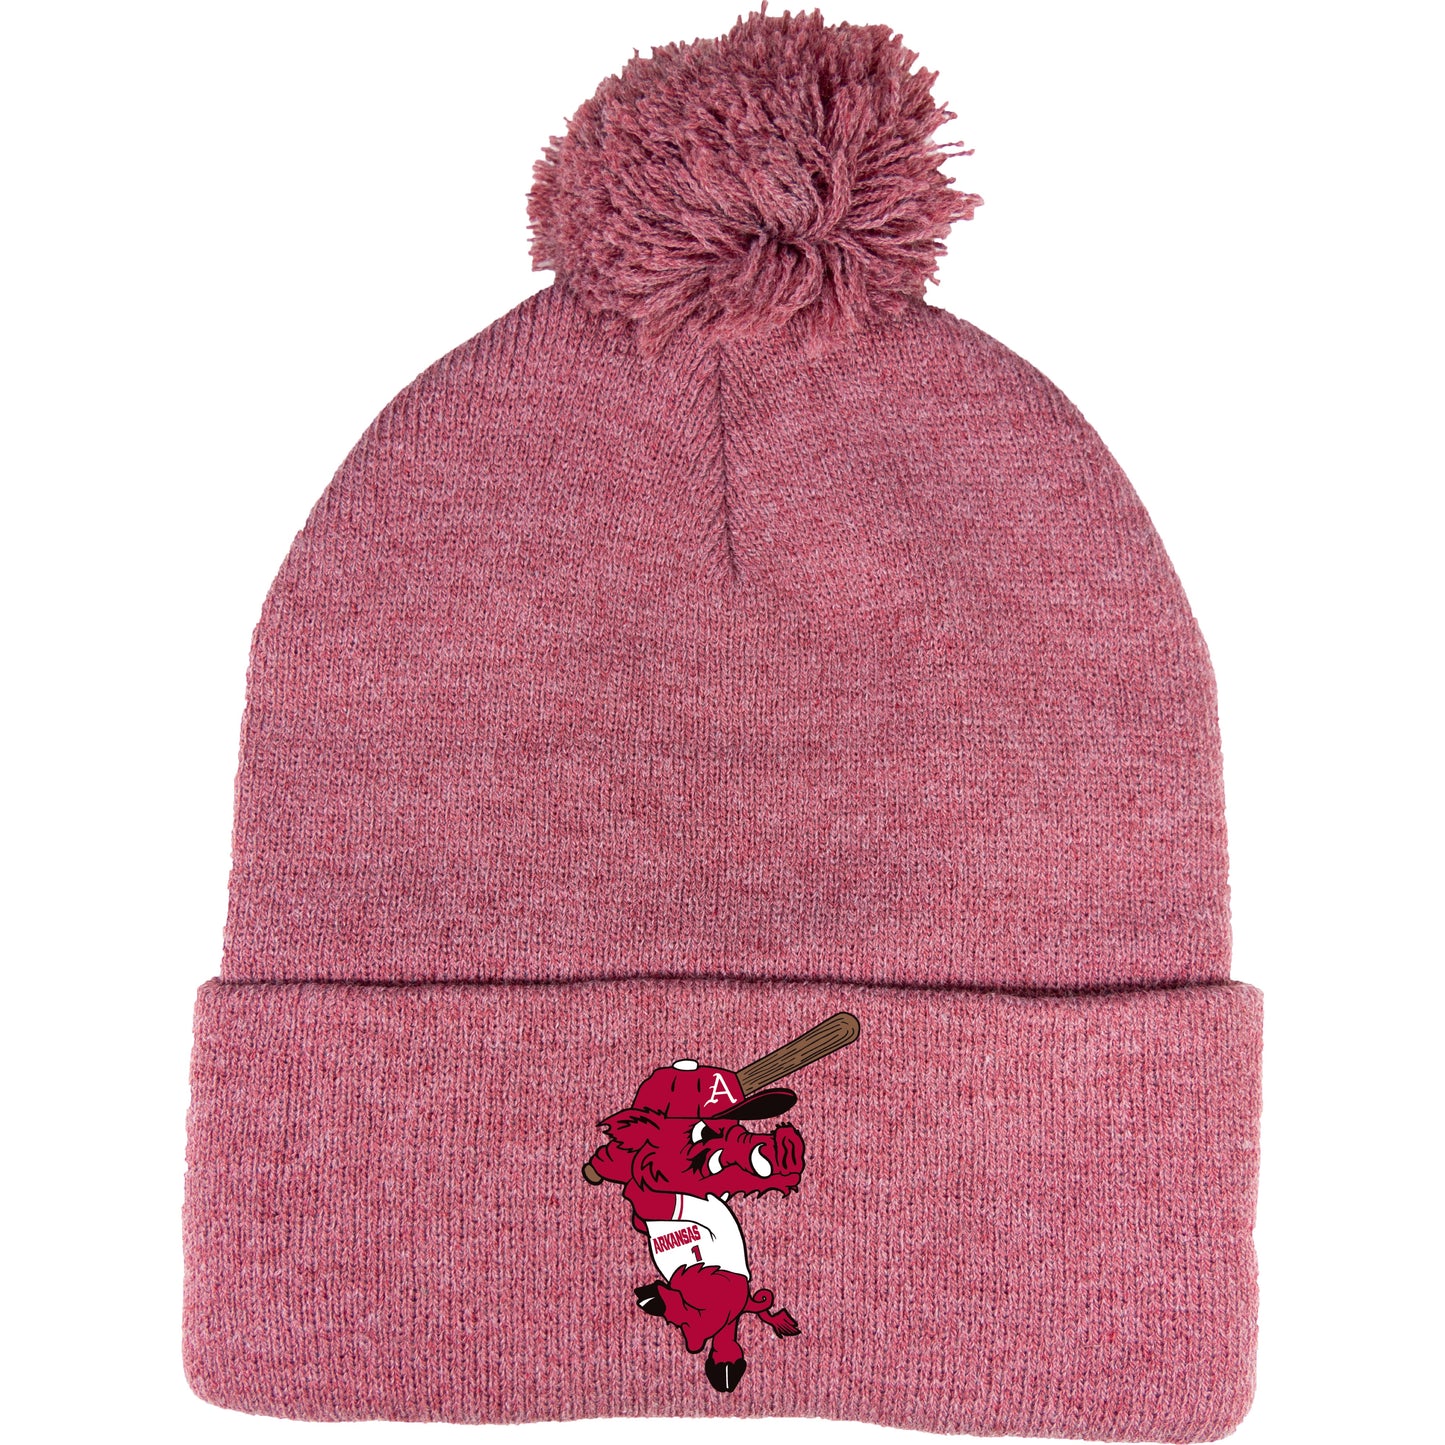 Ribby at Bat 12 in Knit Pom-Pom Top Beanie- Heather Cardinal - Ten Gallon Hat Co.